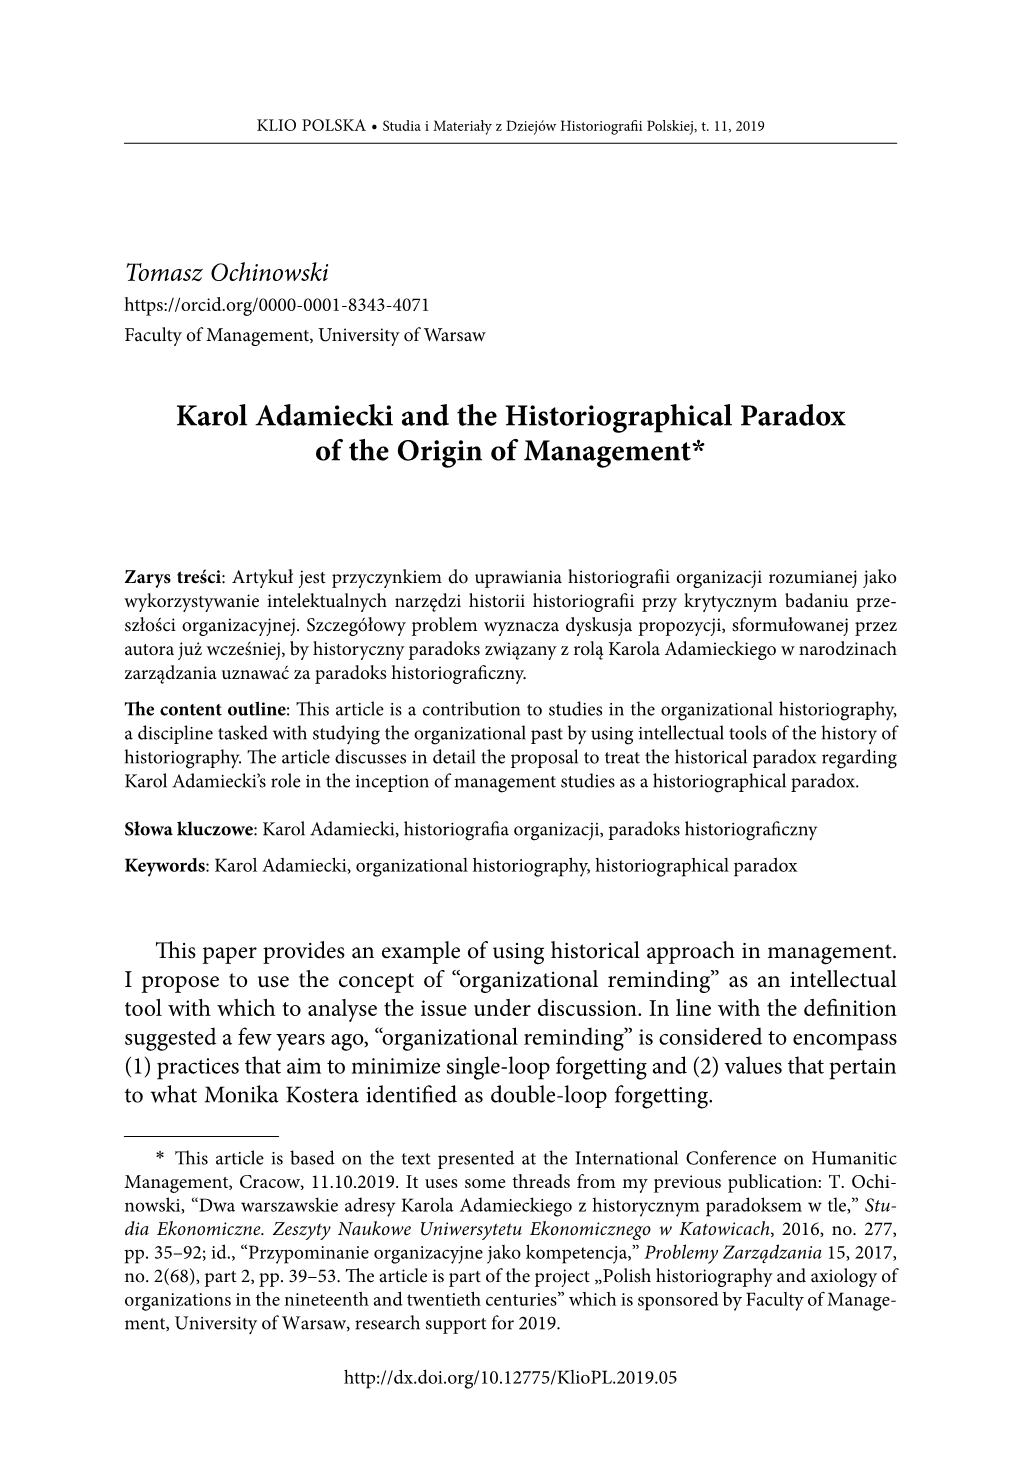 Karol Adamiecki and the Historiographical Paradox of the Origin of Management*